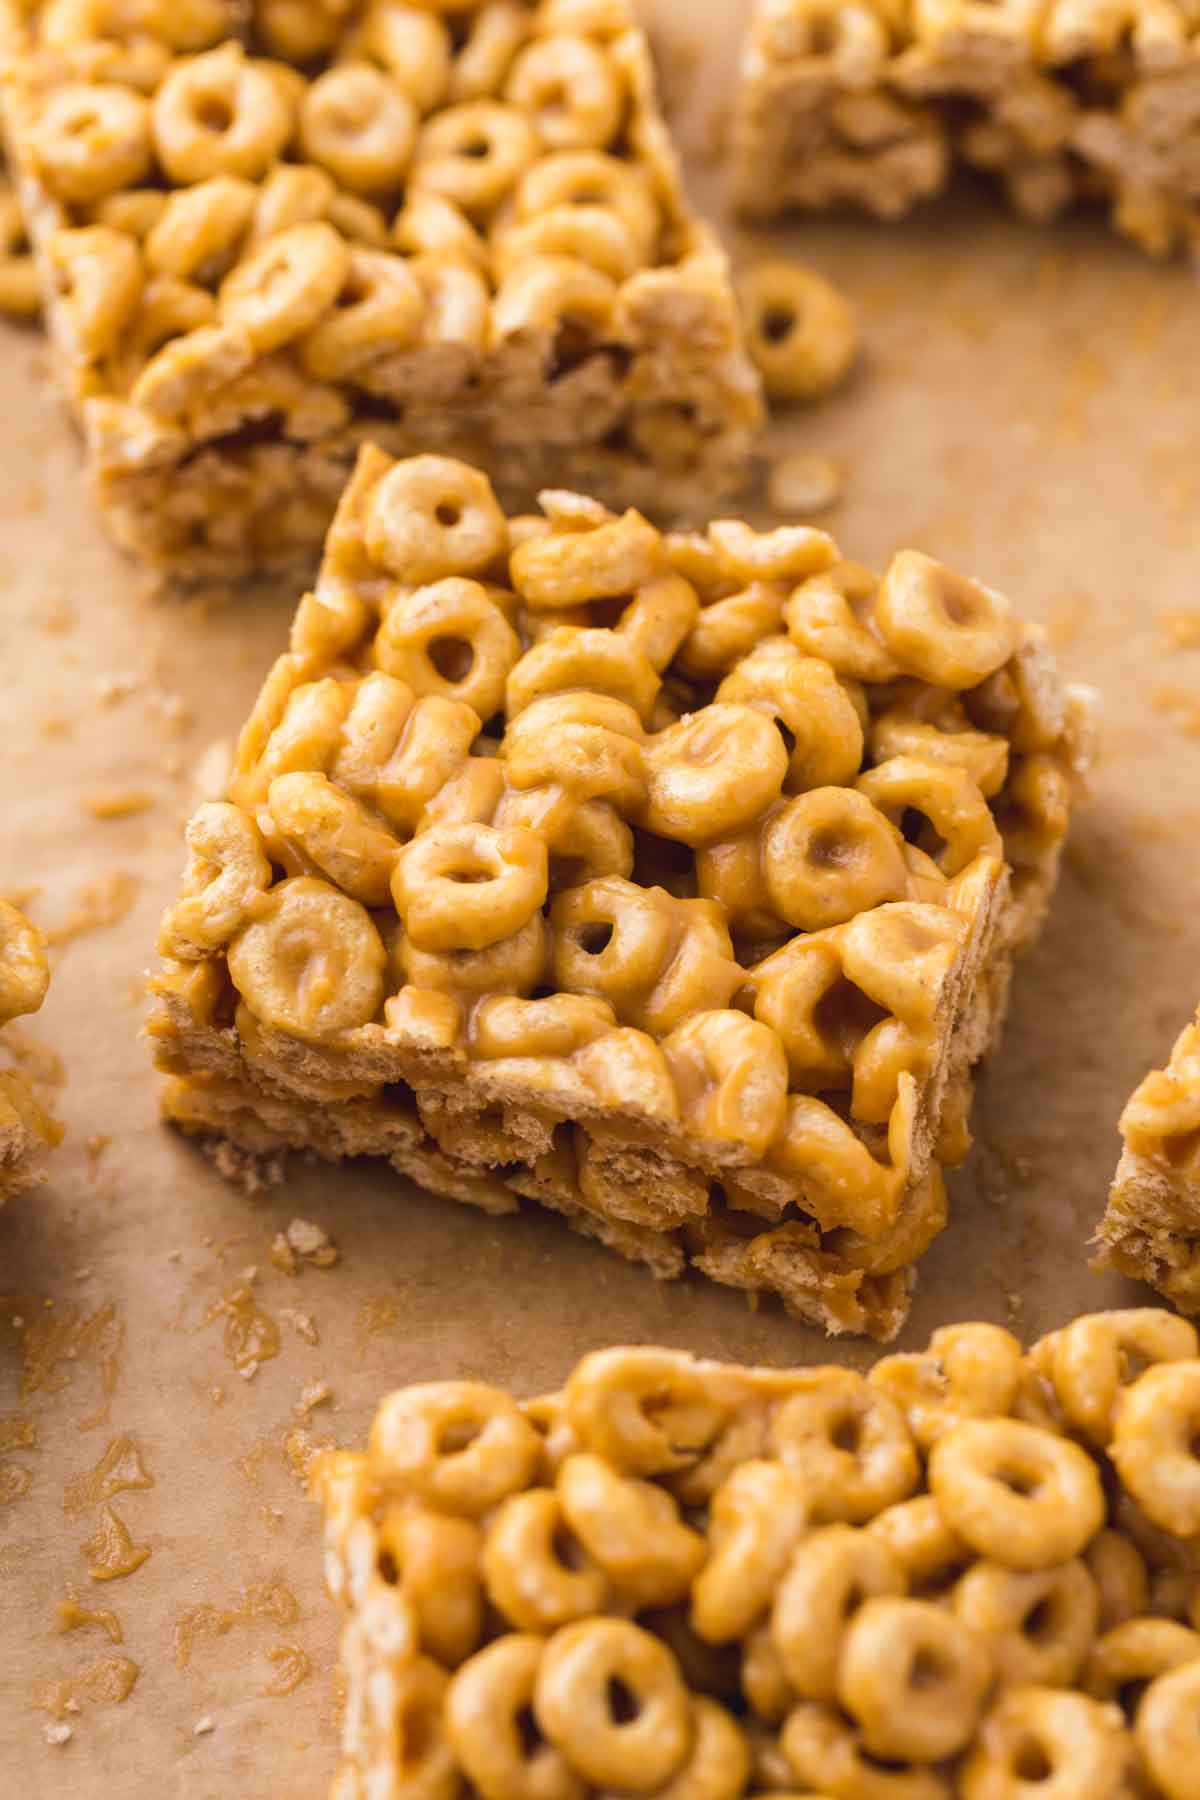 Overhead shot of peanut butter cereal bars made with cheerios